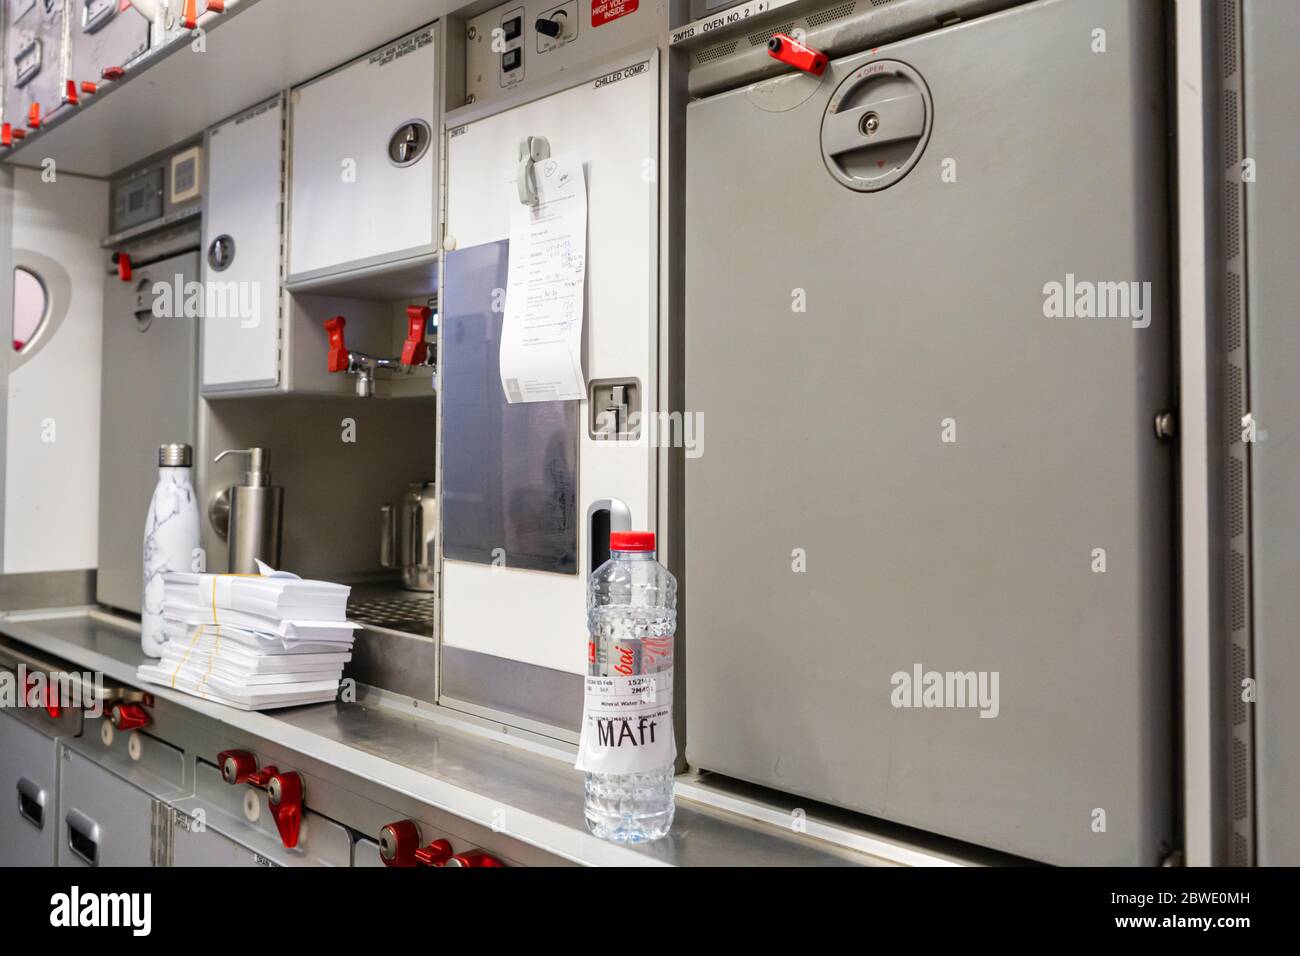 https://c8.alamy.com/comp/2BWE0MH/kitchen-on-the-plane-food-storage-shelves-and-water-dispenser-2BWE0MH.jpg